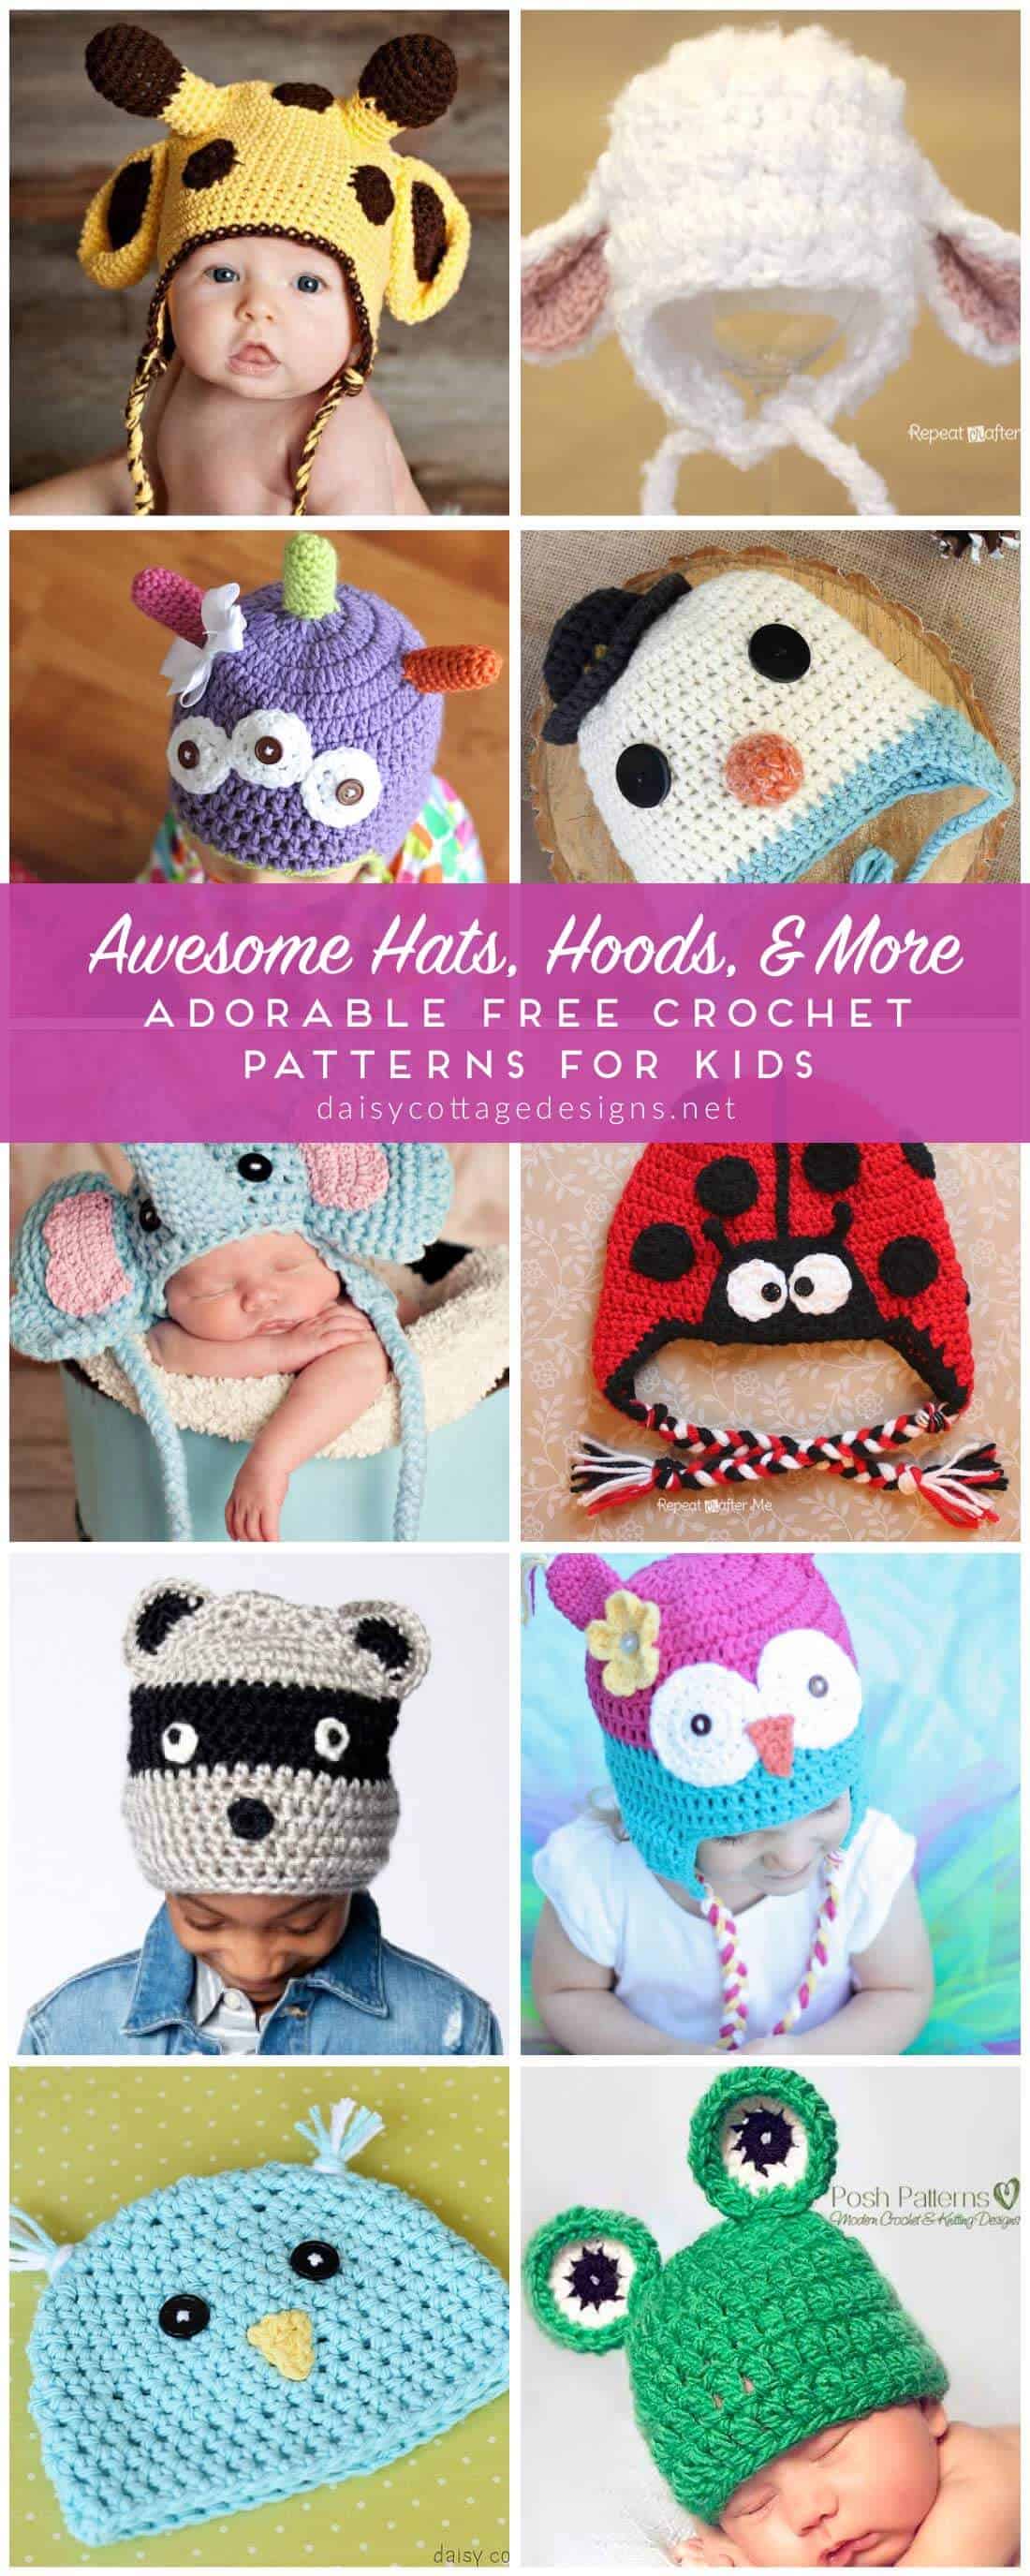 Crochet Hat Patterns | Crochet Hood Patterns | Crochet Kids Hats Patterns | Free Crochet Patterns | Use these free crochet patterns to whip up adorable hats for the kids in your life! Compiled by Daisy Cottage Designs, there's something every little person in your life will love. 